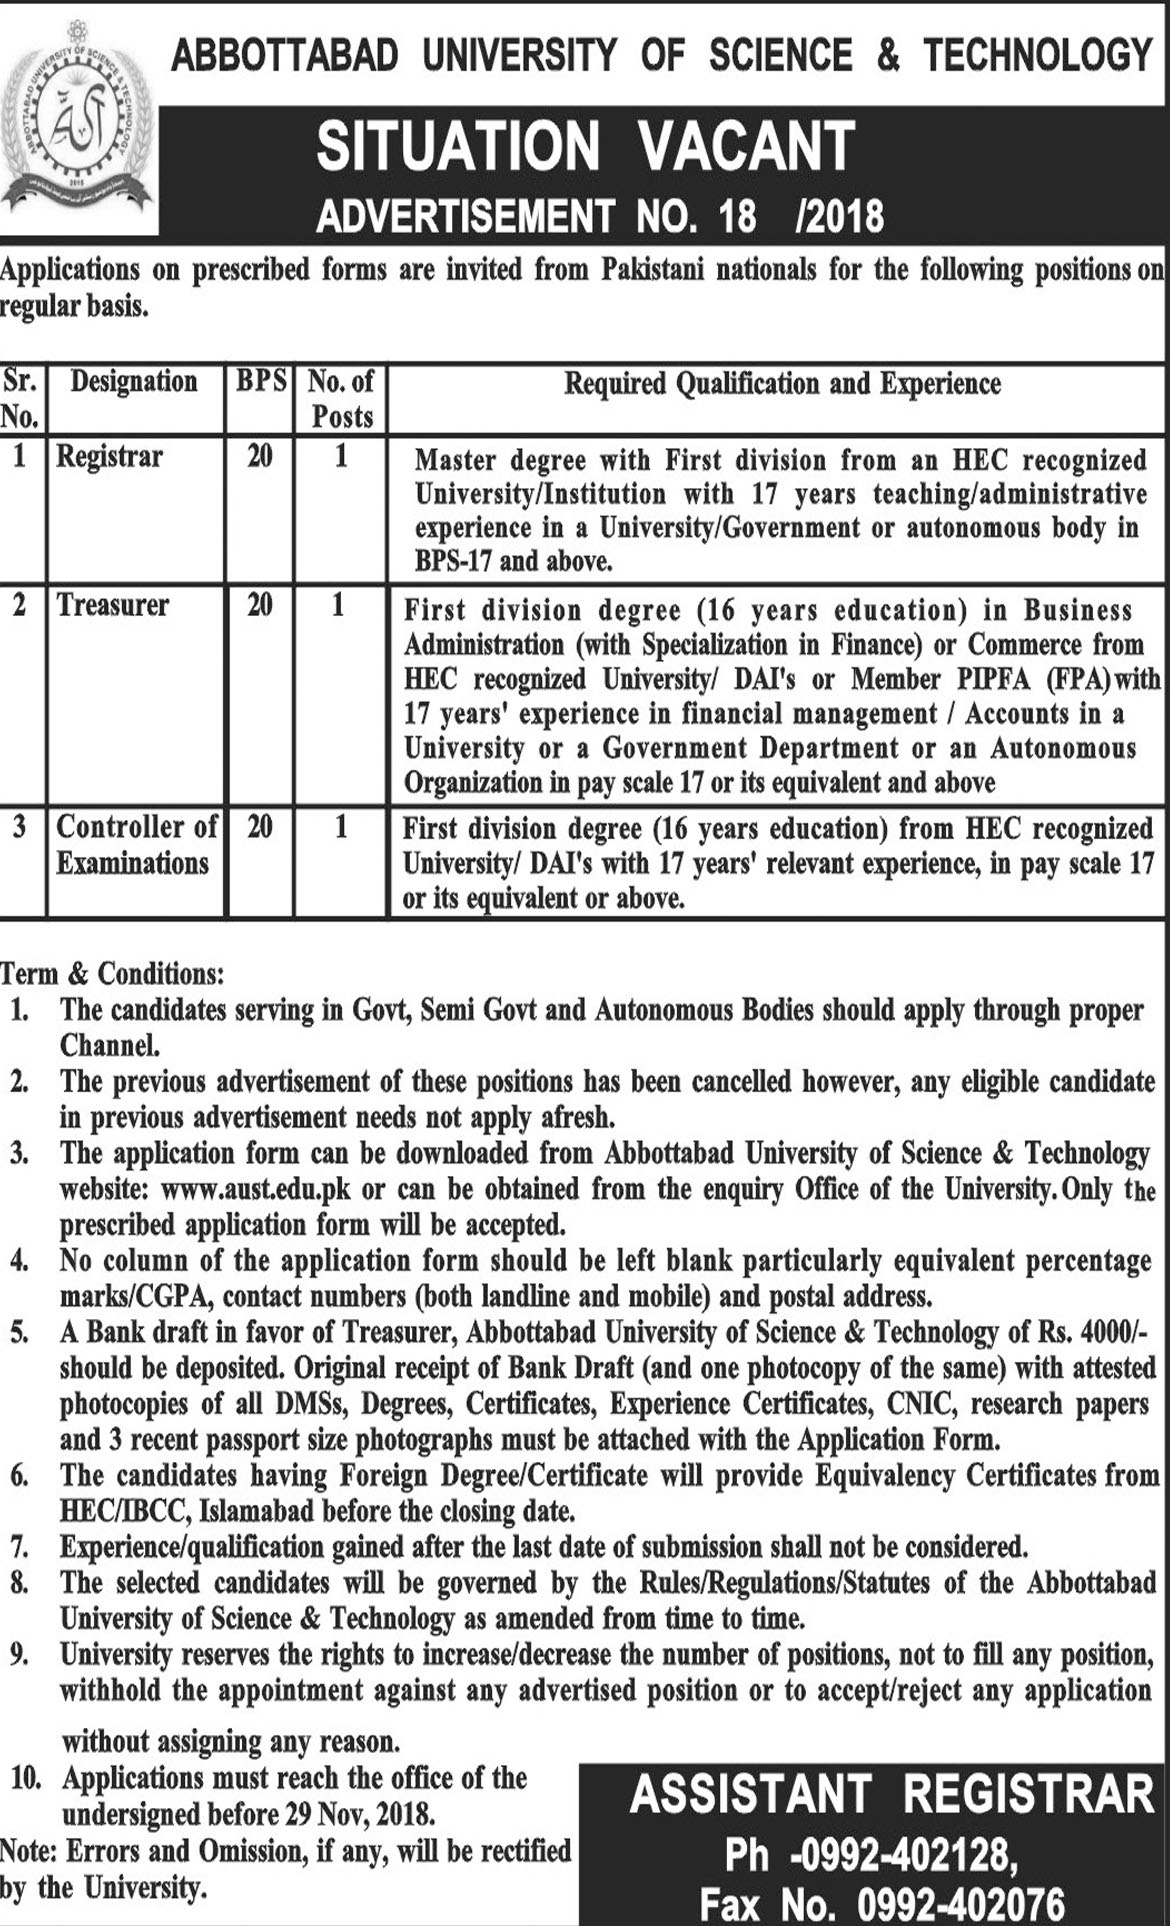 Jobs In Abbottabad University Of Science And Technology 09 Nov 2018